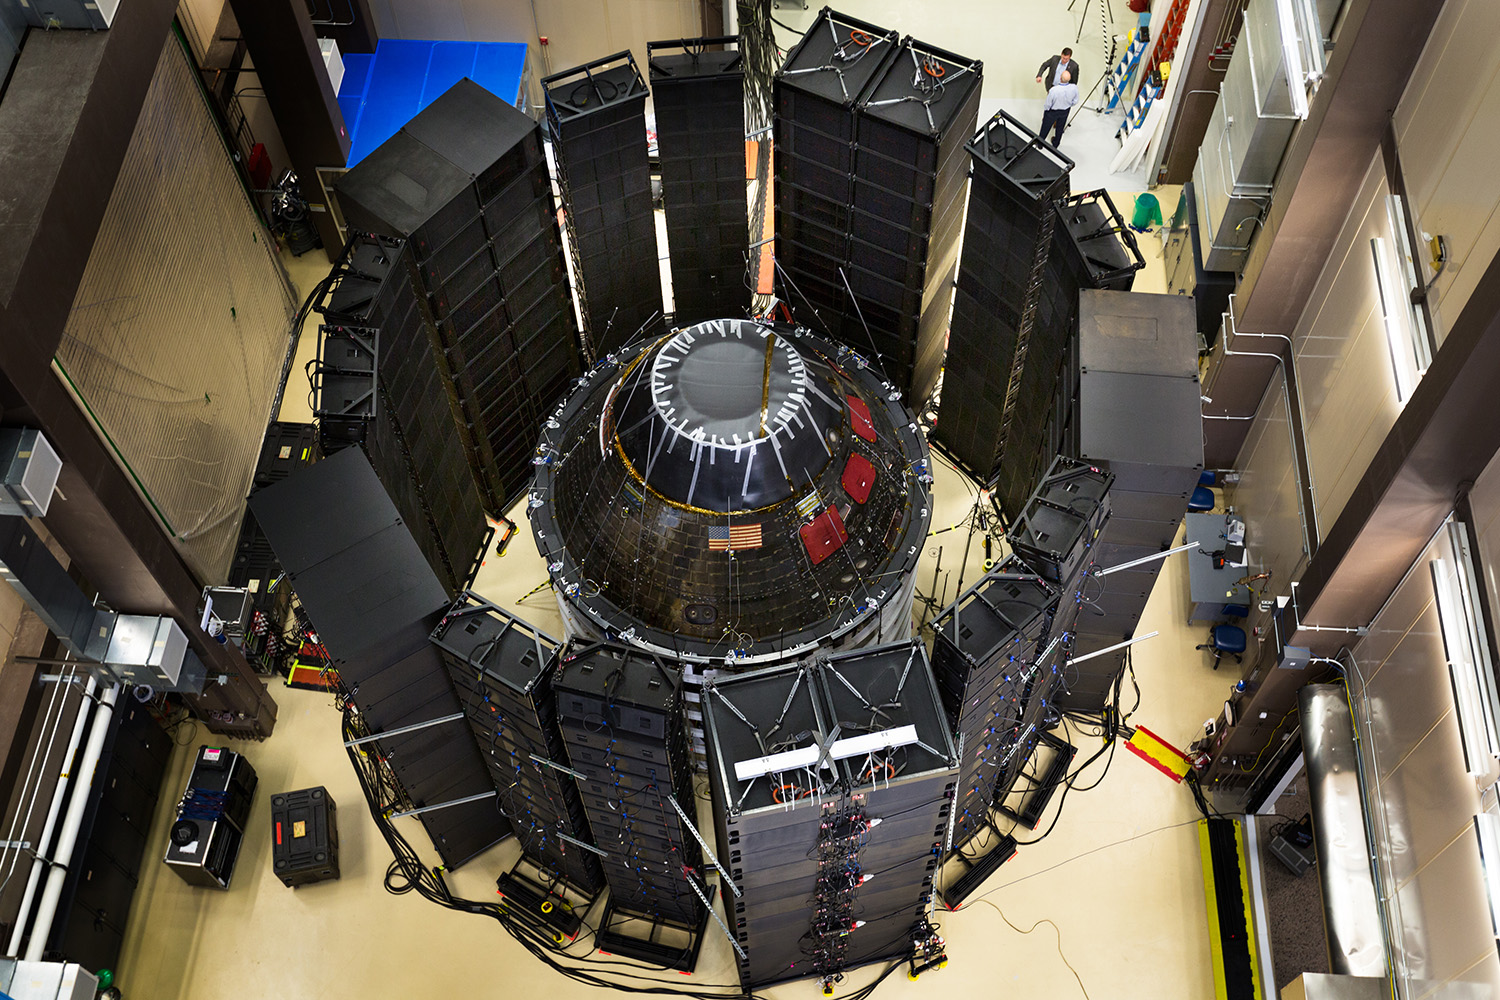 Lockheed Built A Ridiculously Huge Sound System That Will Never Play Music